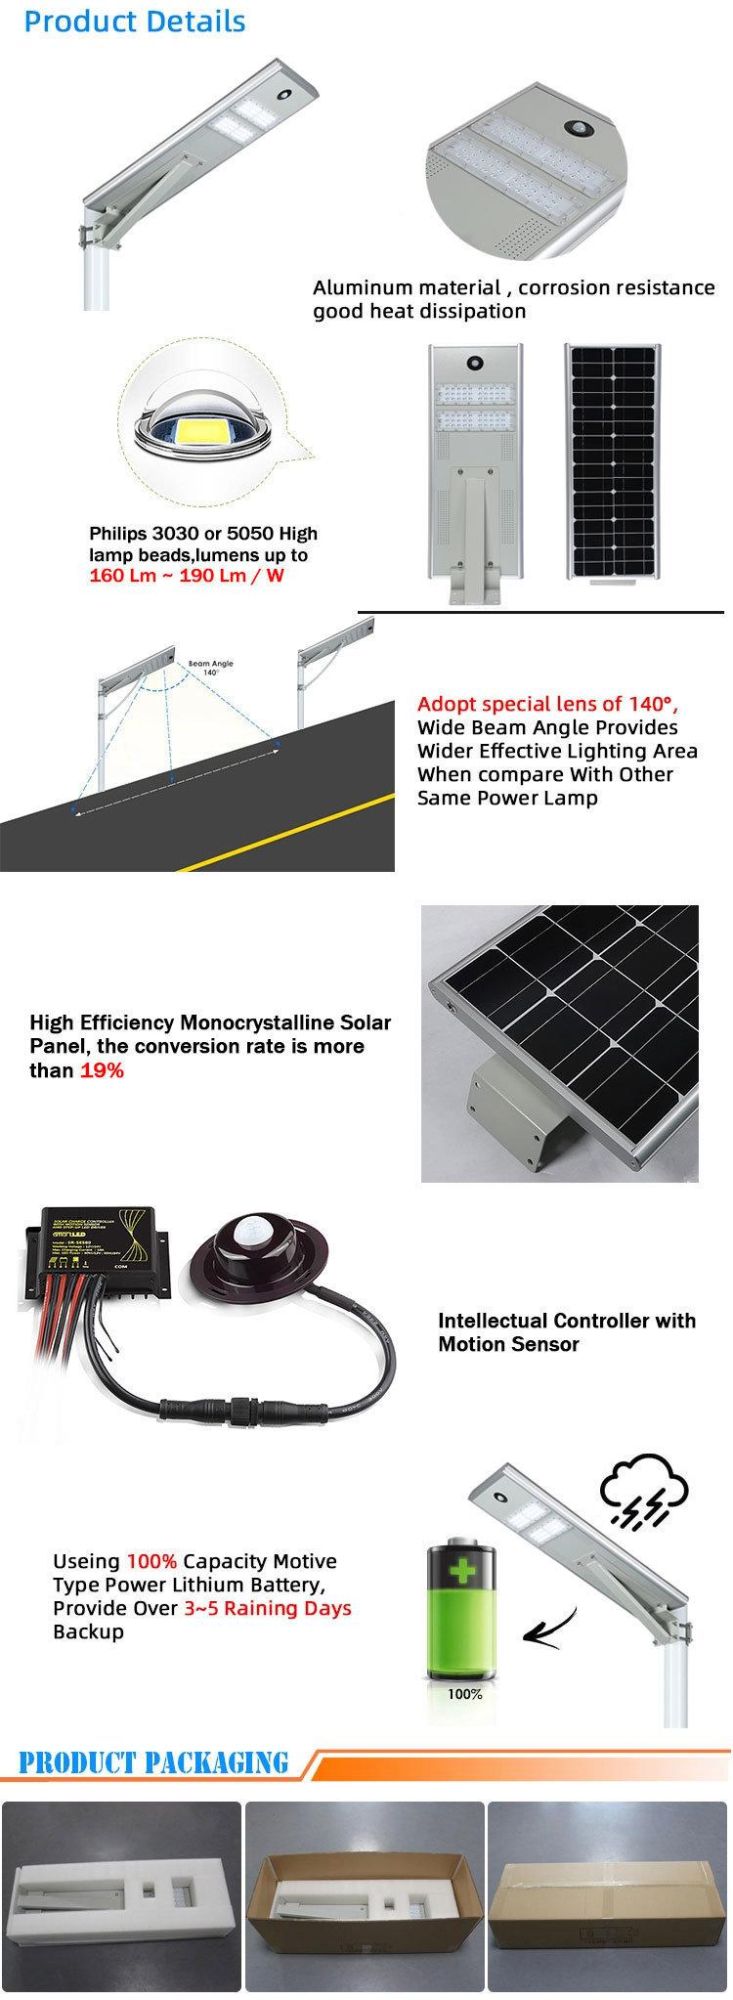 New Product Hot Sale 50W New Model Integrated Design All in One Solar Street Light